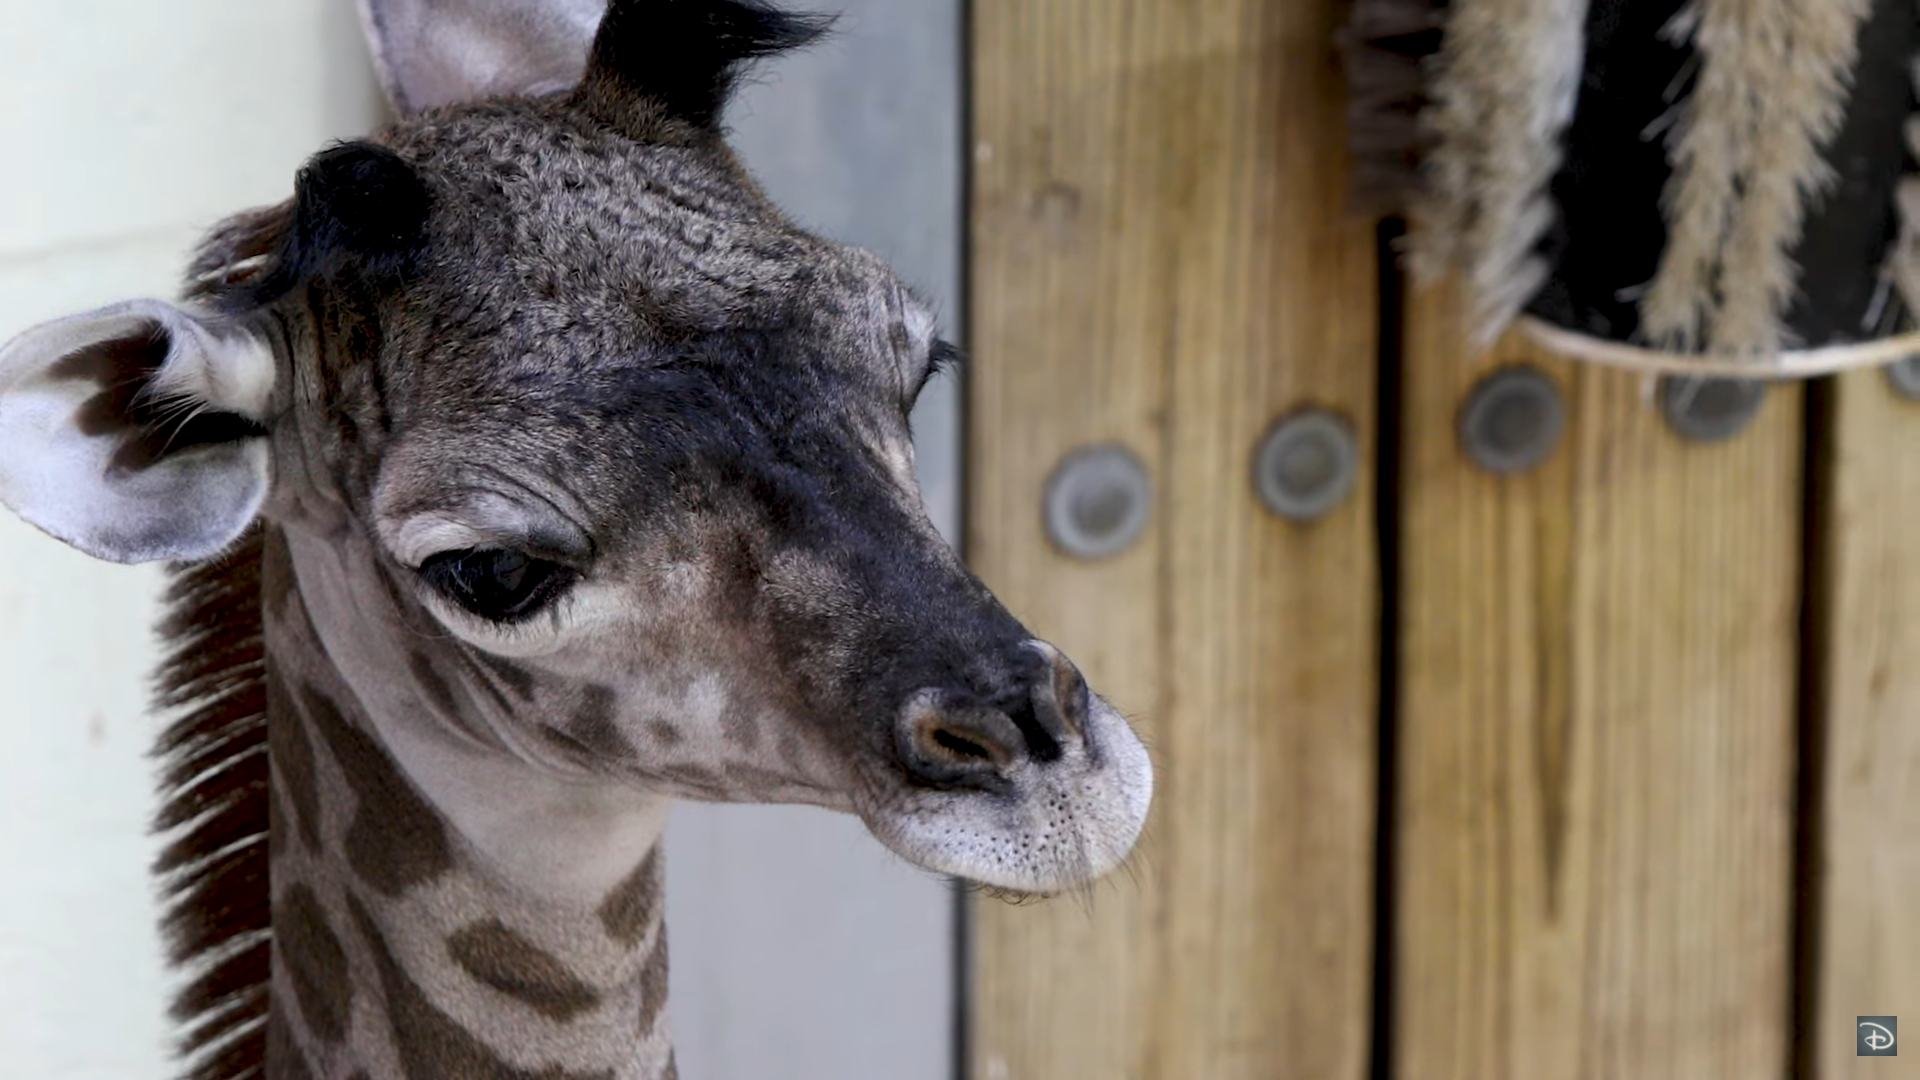 Special Delivery! Disney's Animal Kingdom welcomes new baby giraffe